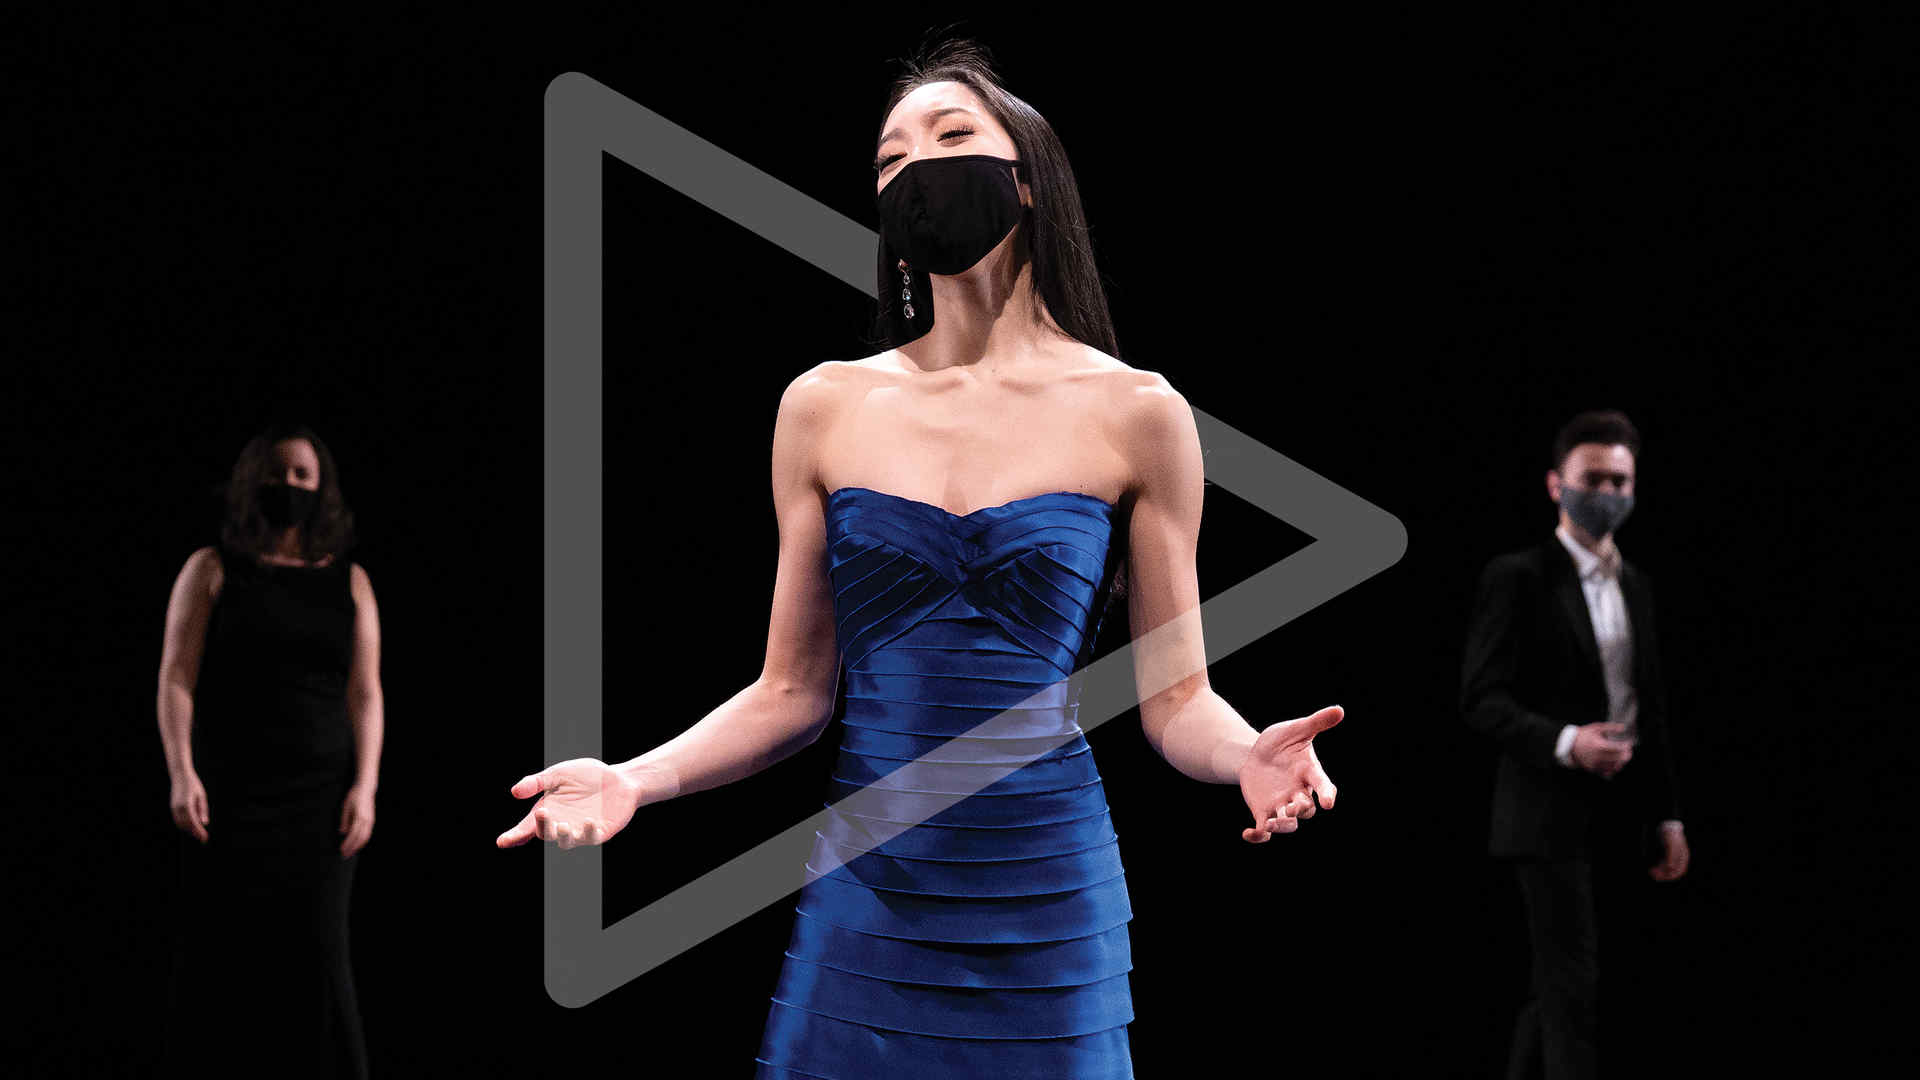 Three performers on stage and a grey play button is superimposed on the middle performer to communicate on-demand playability of the Juilliard LIVE offerings